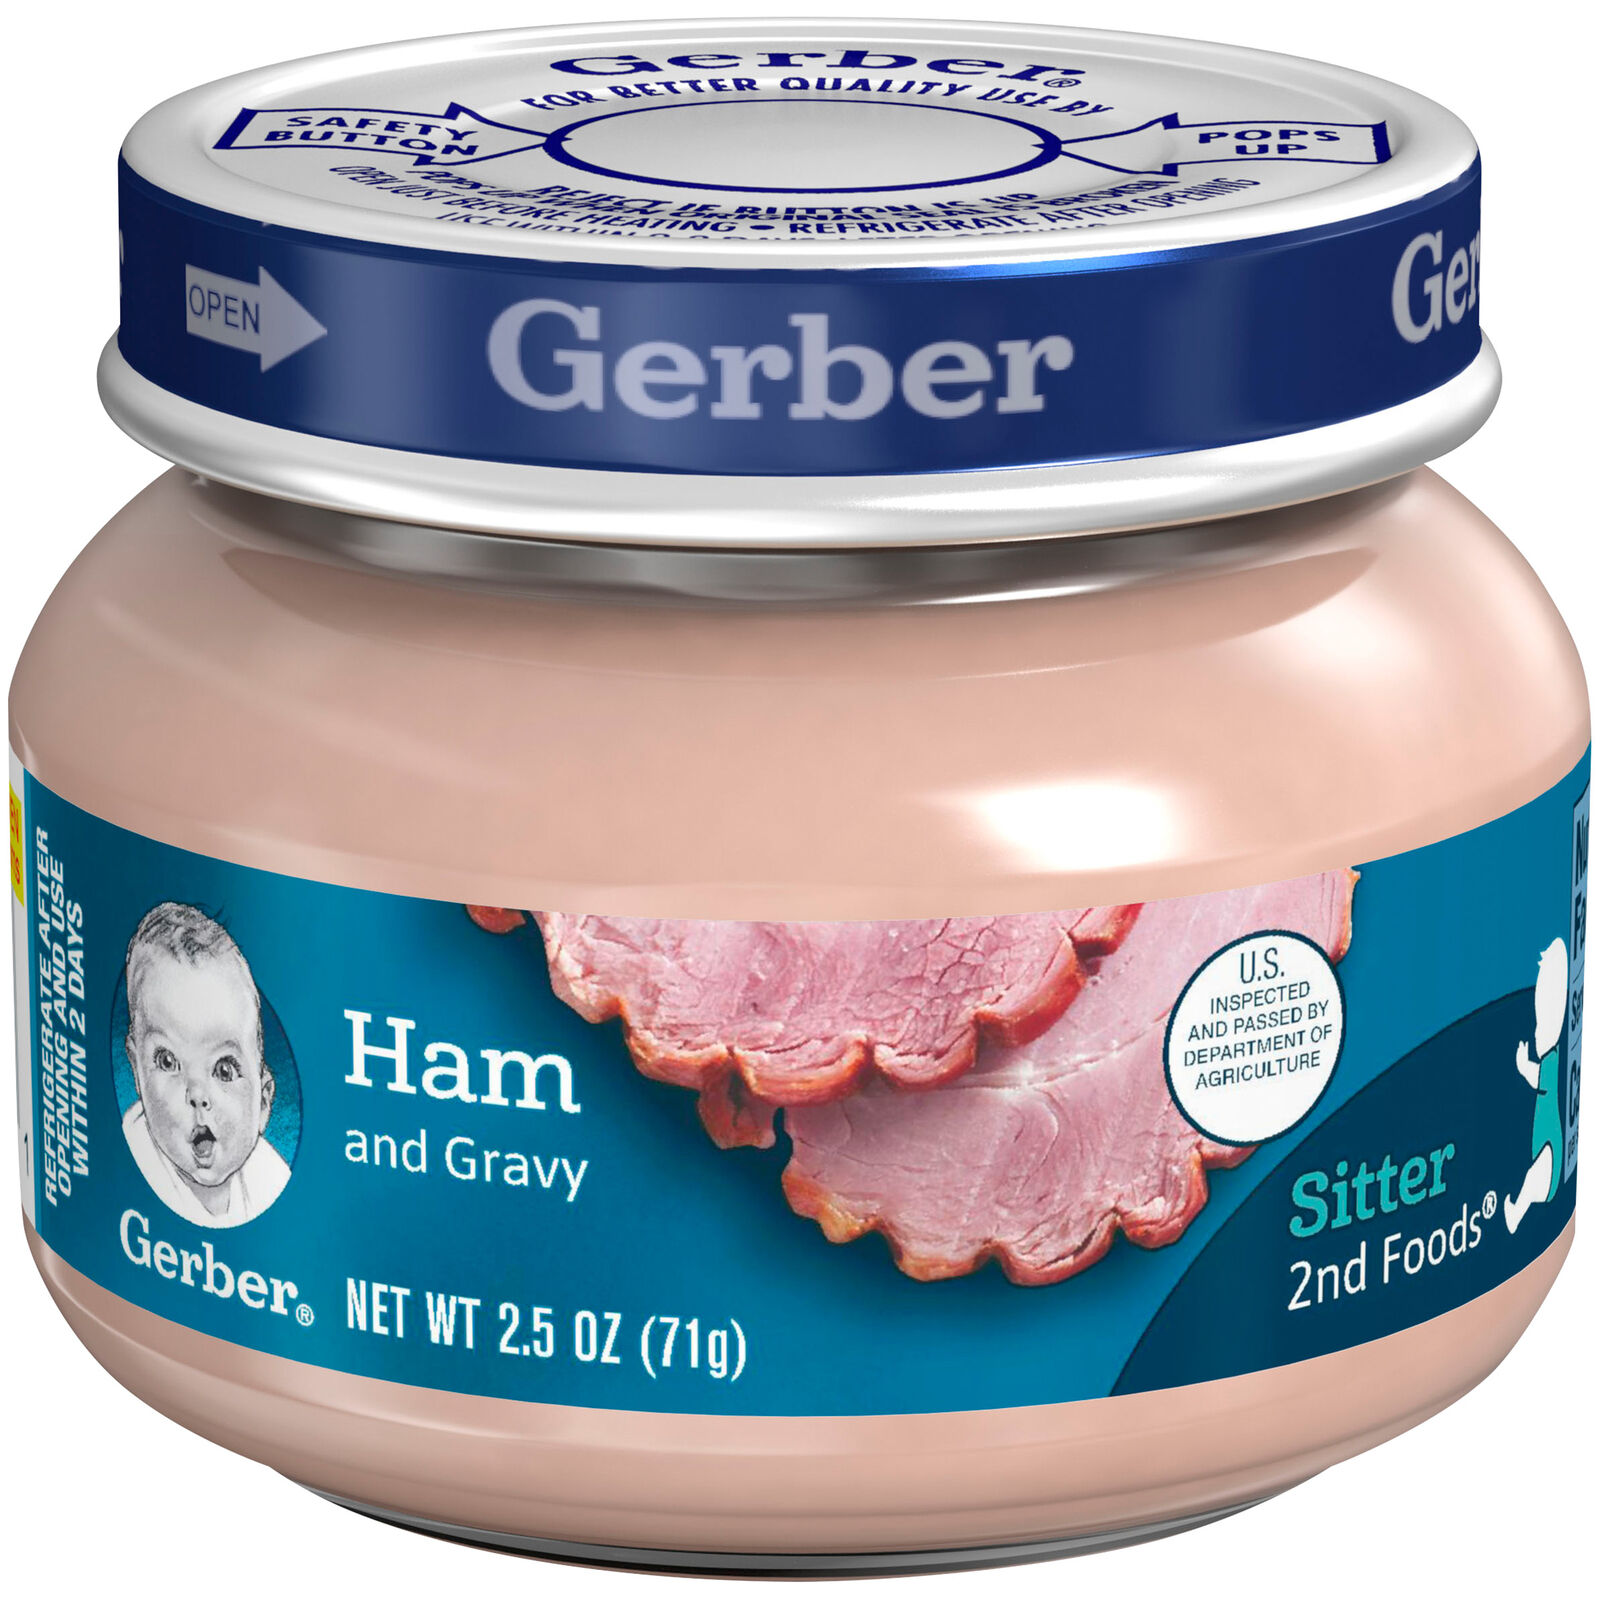 Gerber 2nd Foods Baby Food Jars Ham and Gravy Non GMO – 2.5 Oz – Pack of 20 Gerber Does not apply